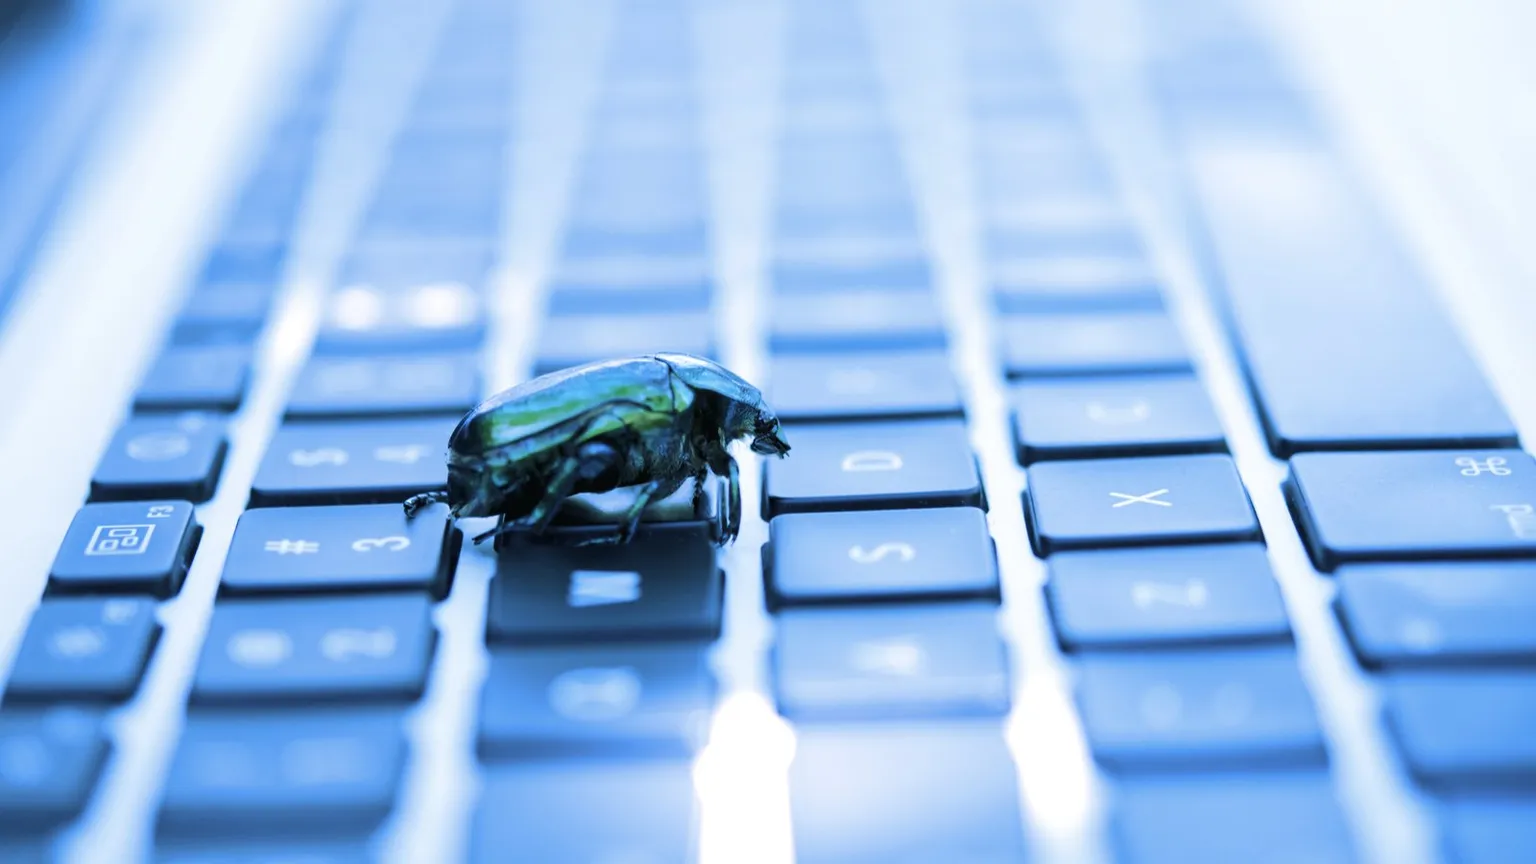 A bug's life. Image: Shutterstock